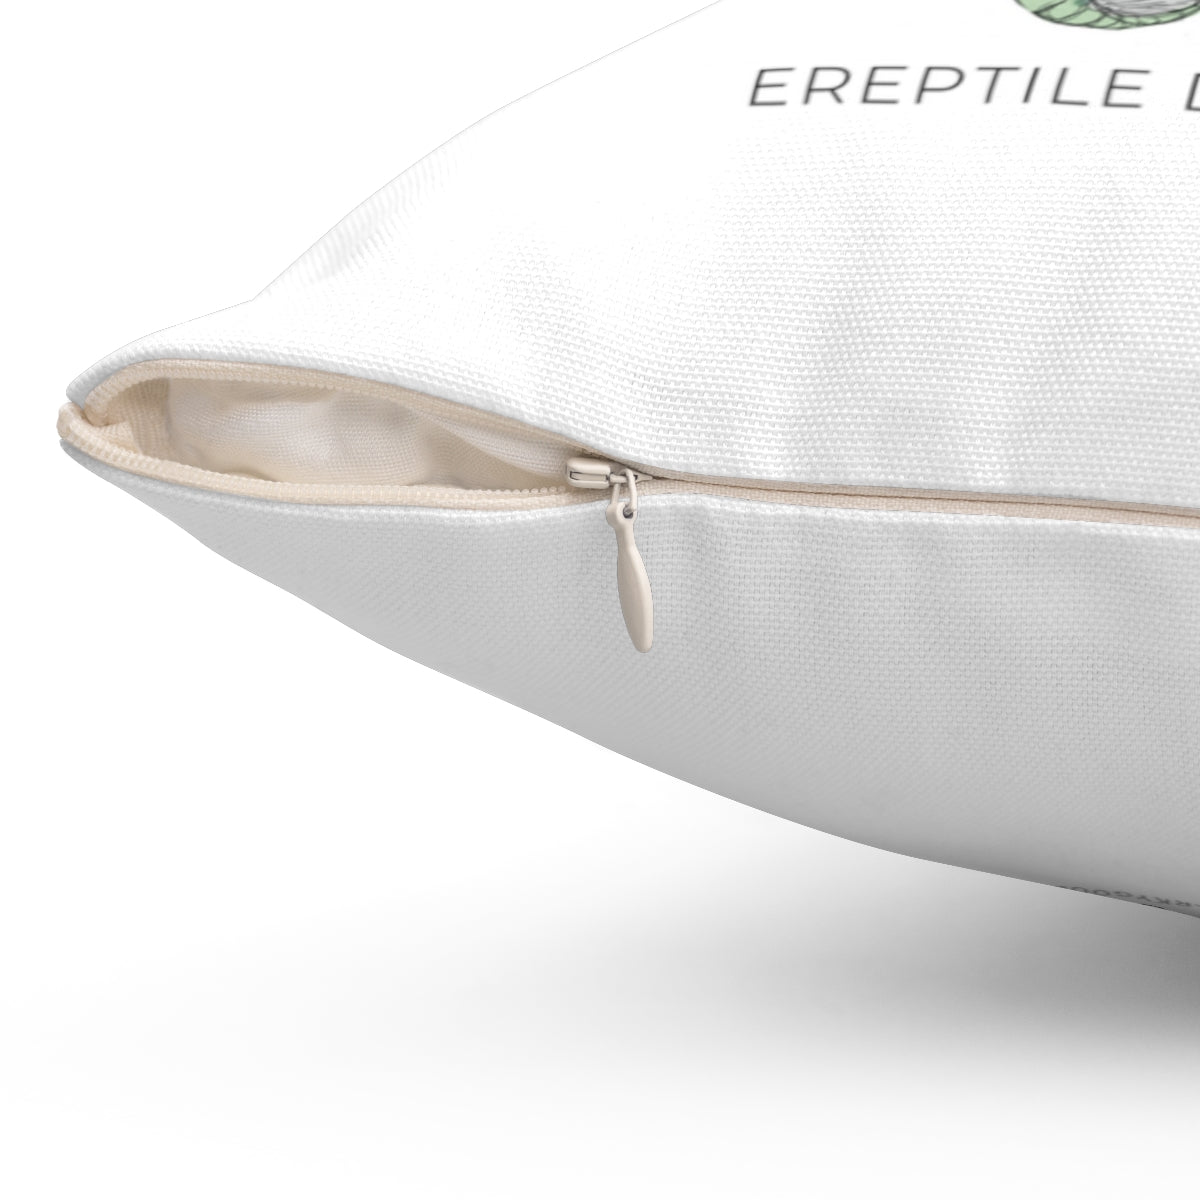 Ereptile Dysfunction | Lizards in Bed | Snarky Throw Pillow | 4 sizes